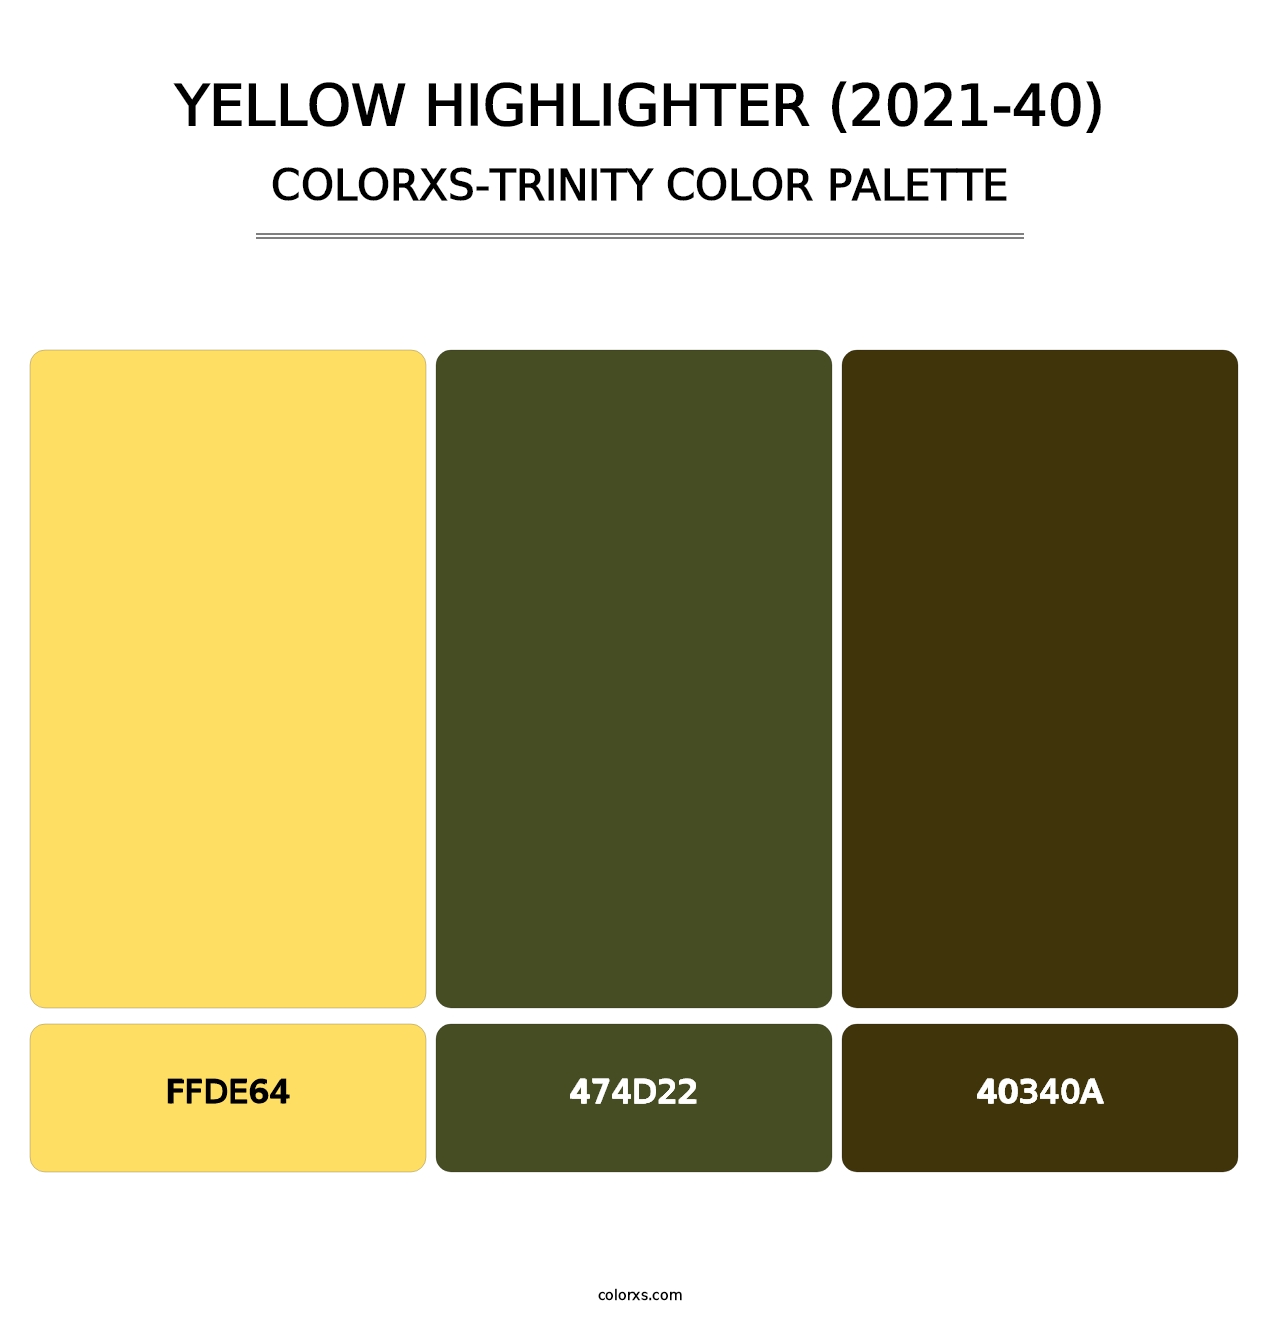 Yellow Highlighter (2021-40) - Colorxs Trinity Palette